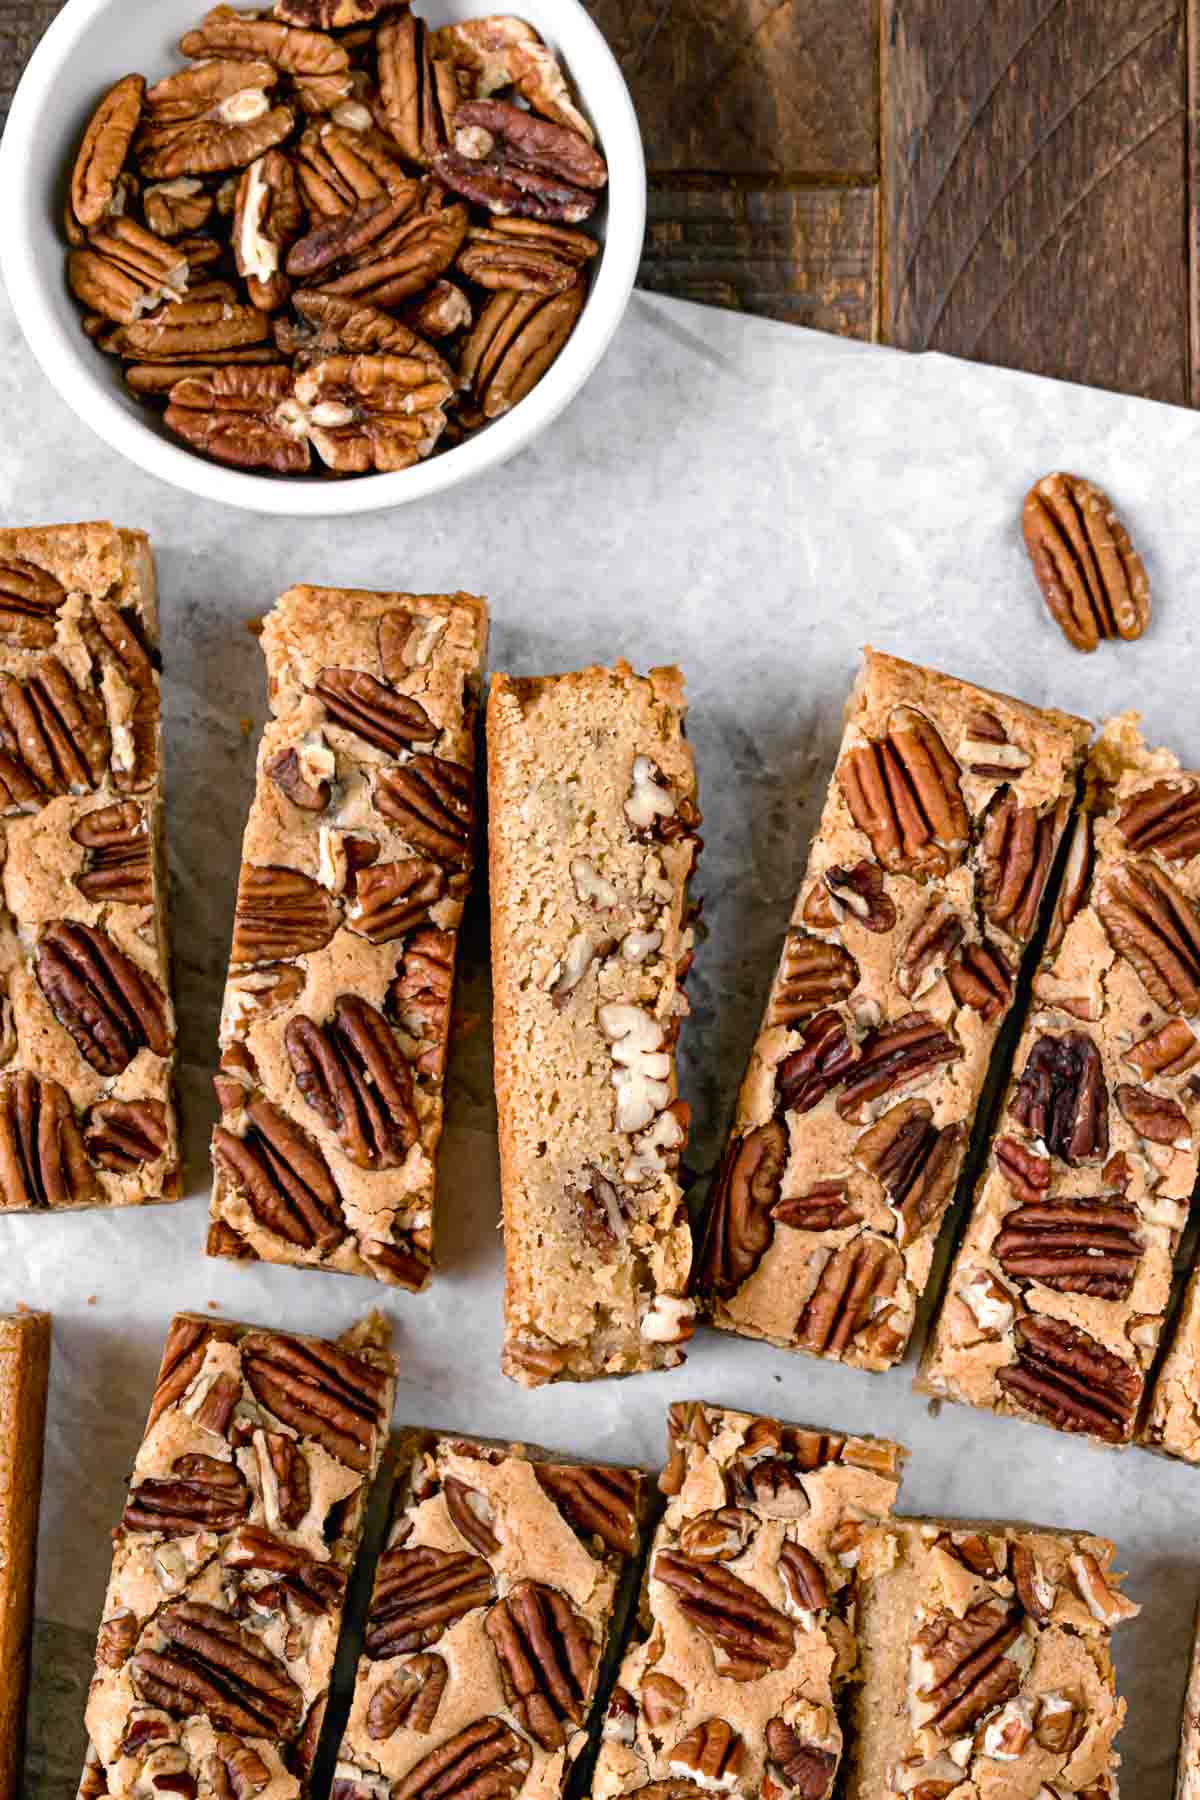 Maple Pecan Bars sliced and served on white parchment paper.